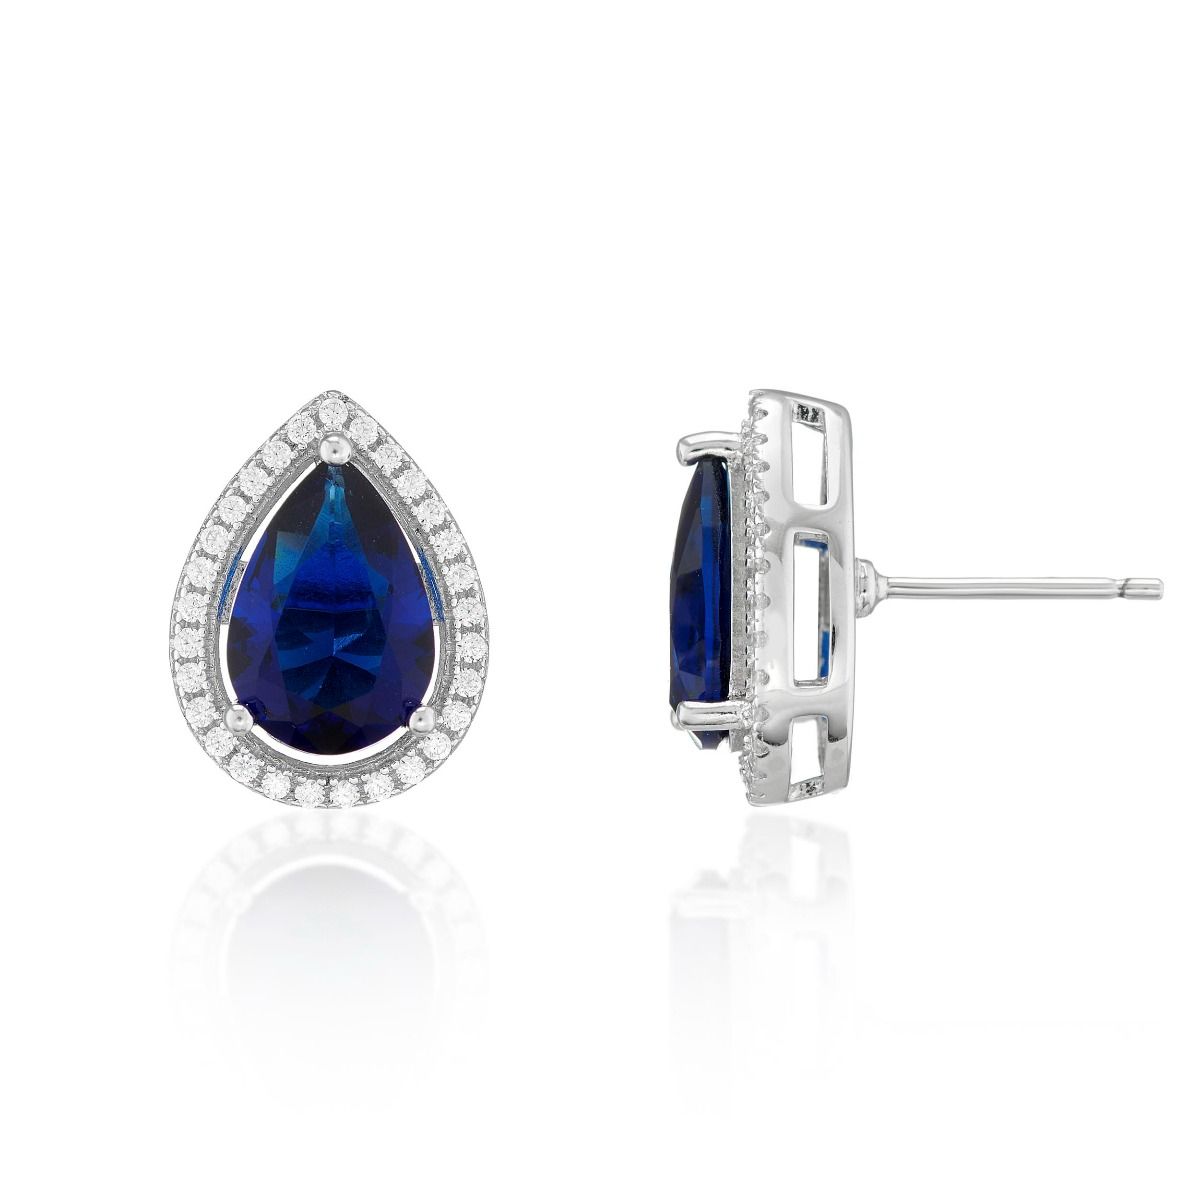 BUCKLEY LONDON The Flawless Collection - Sapphire Pear Halo Earrings